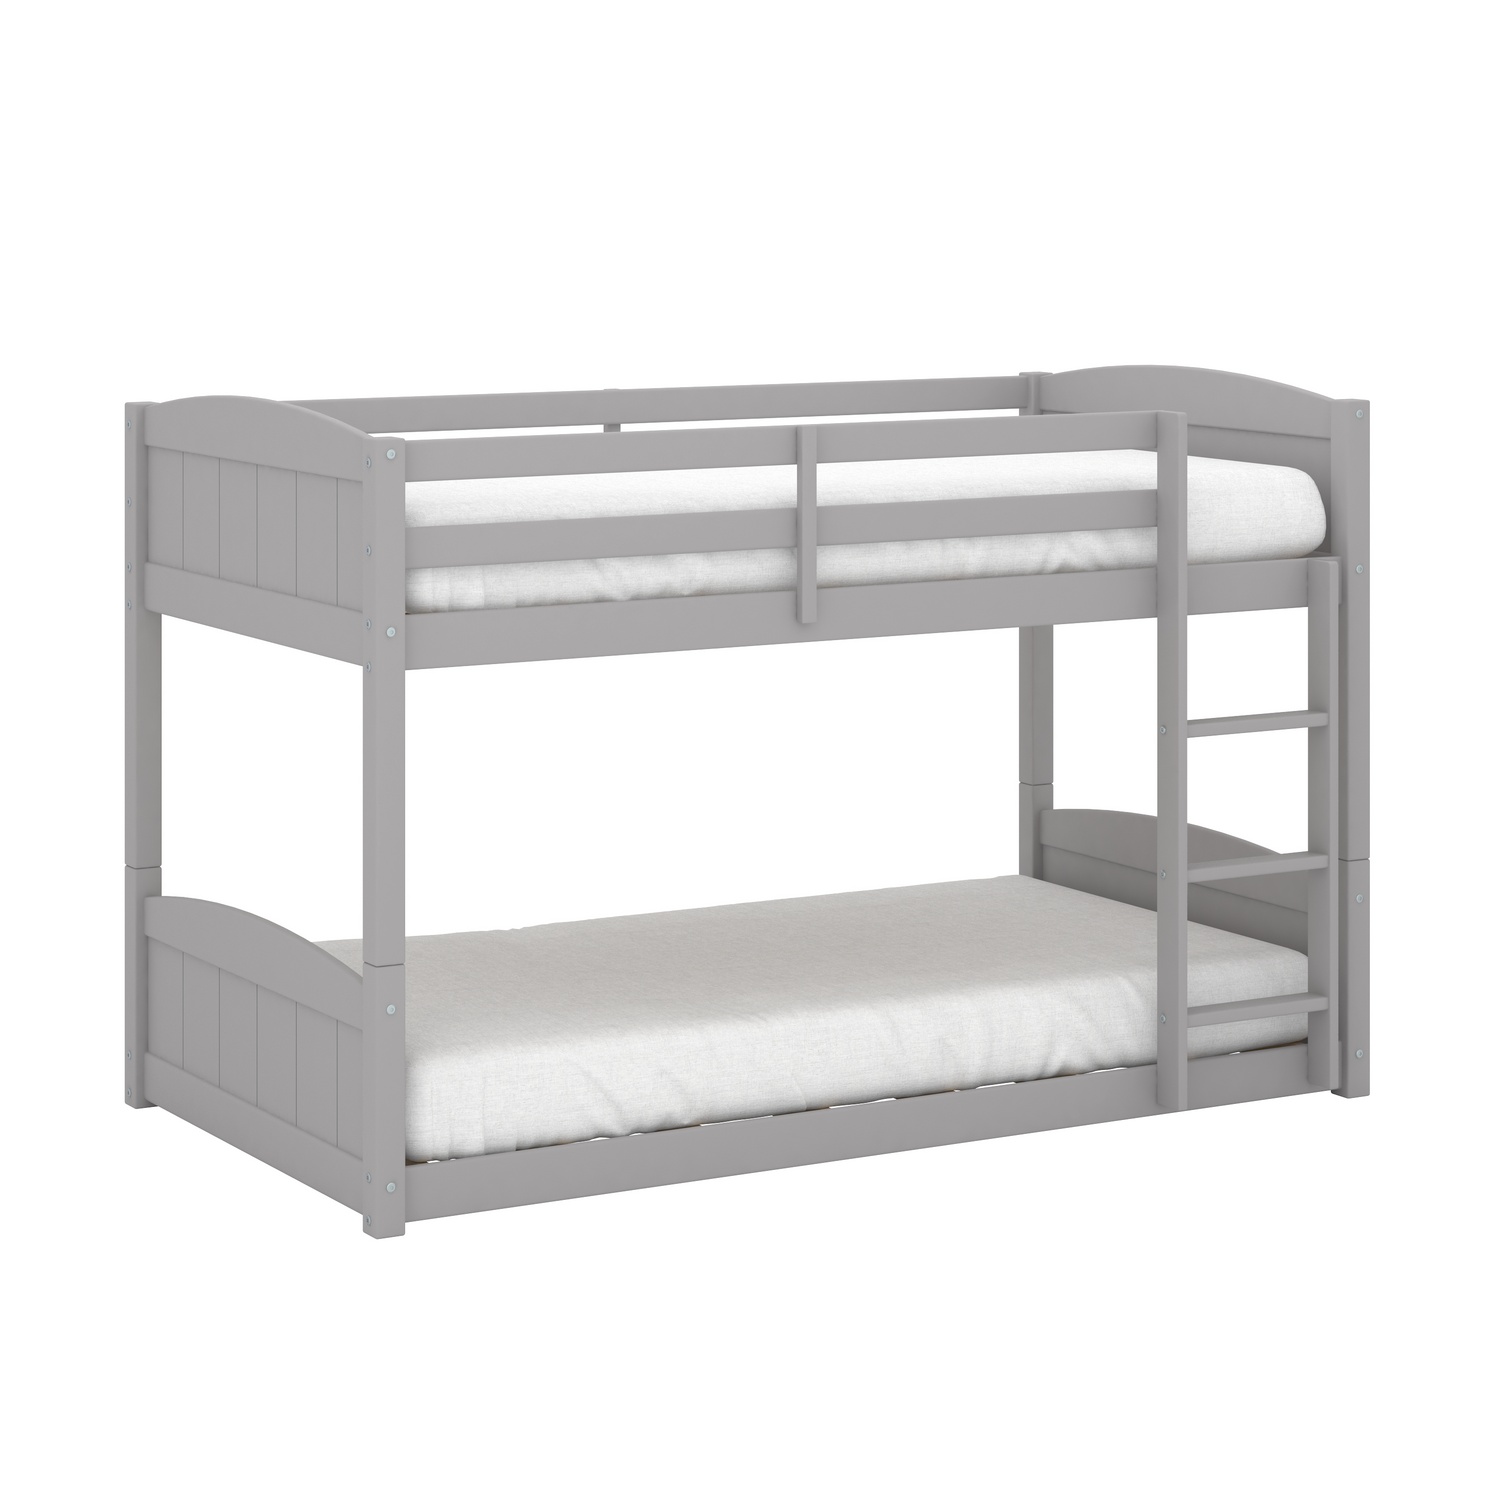 Hillsdale Alexis Wood Arch Twin Over Twin Floor Bunk Bed - Gray